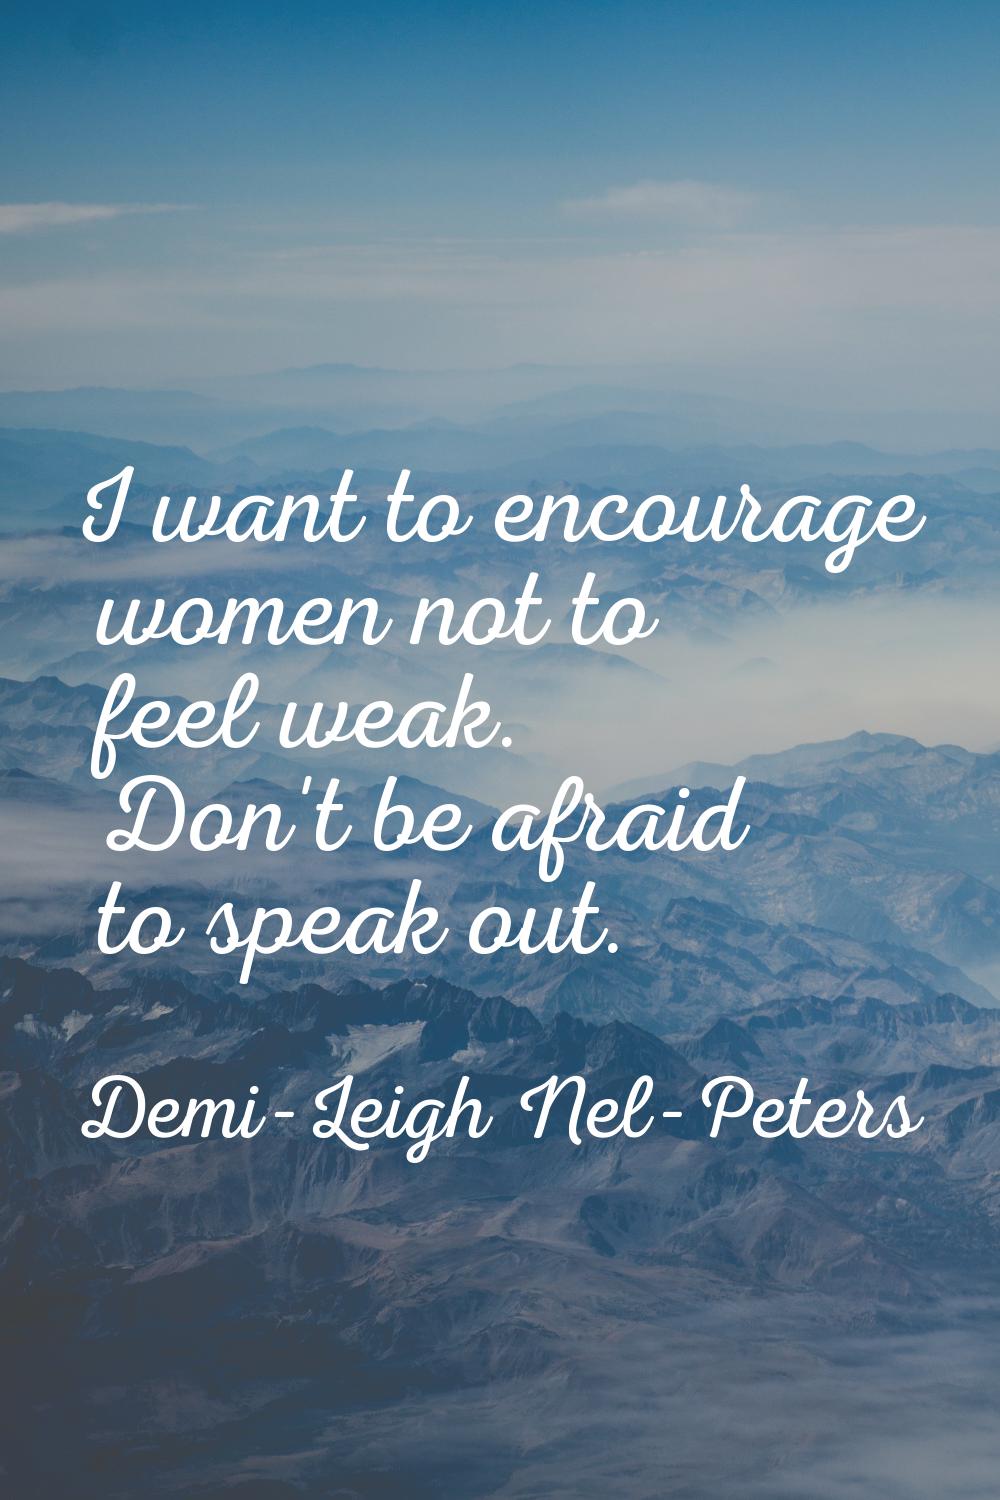 I want to encourage women not to feel weak. Don't be afraid to speak out.